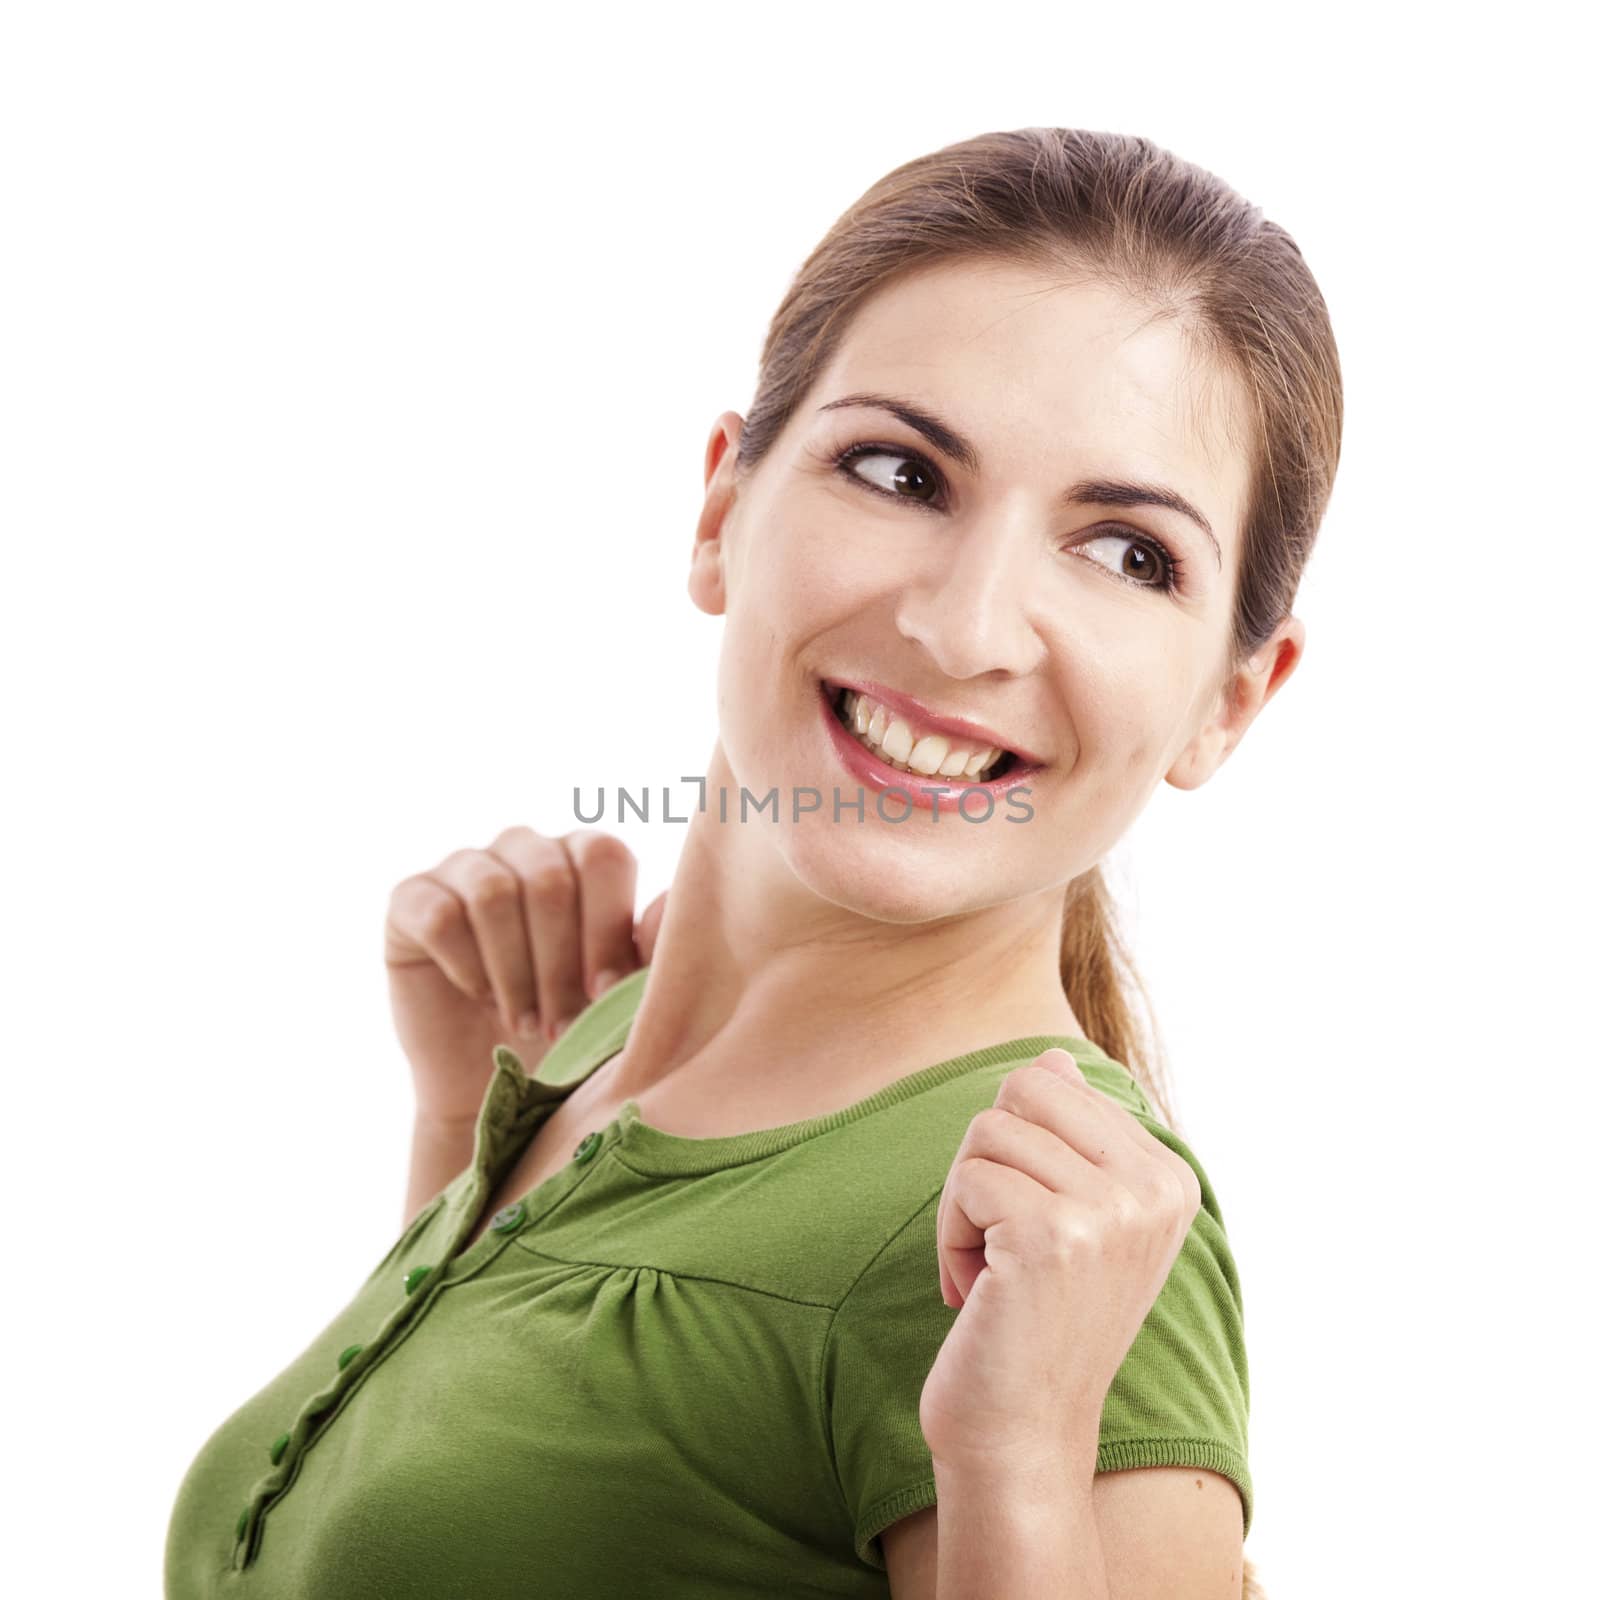 Portrait of a beautiful young woman smiling, isolated over white background